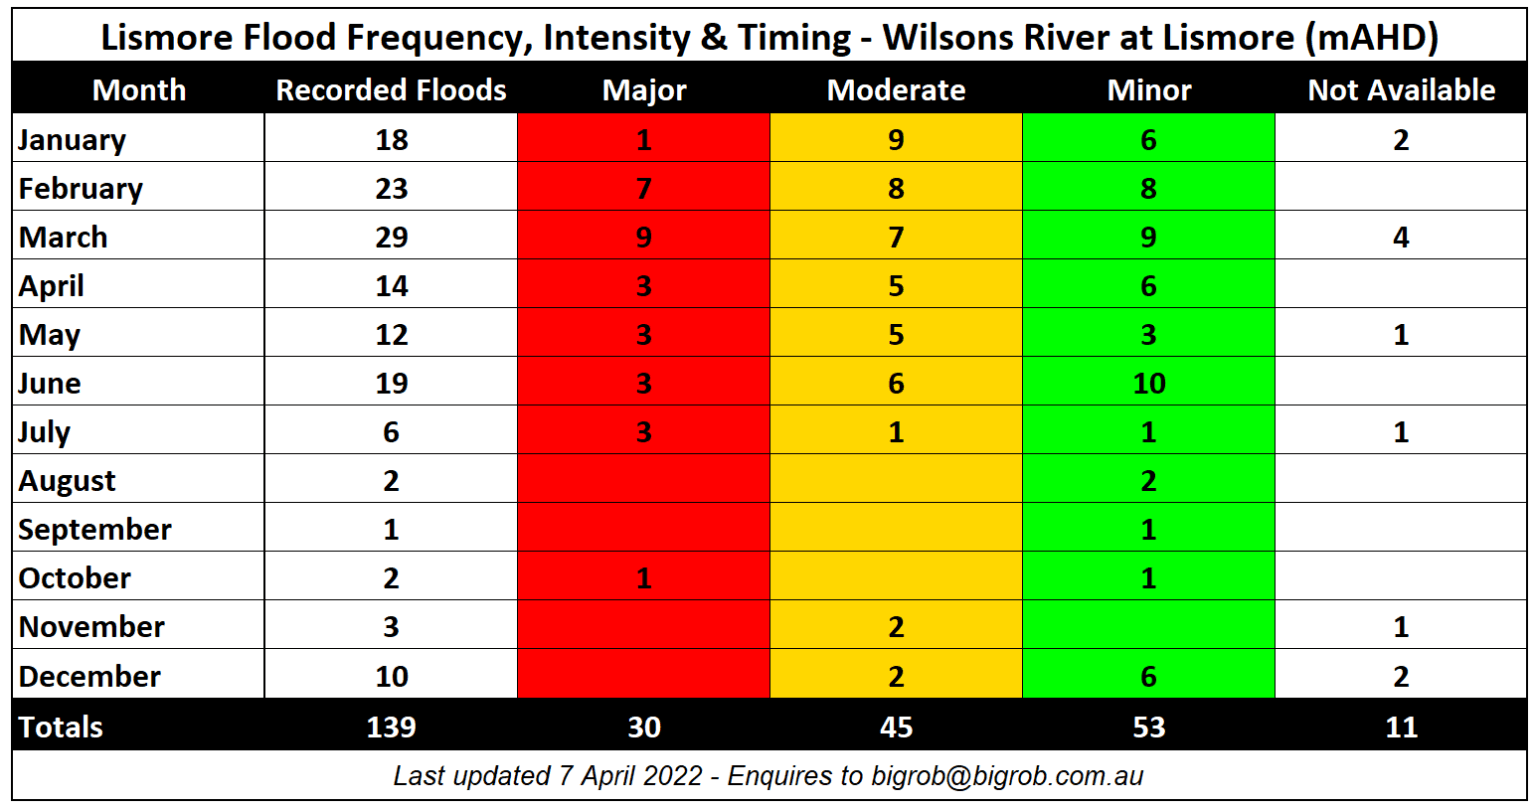 Lismore Flood Frequency, Intensity & Timing - Wilsons River at Lismore (mAHD)